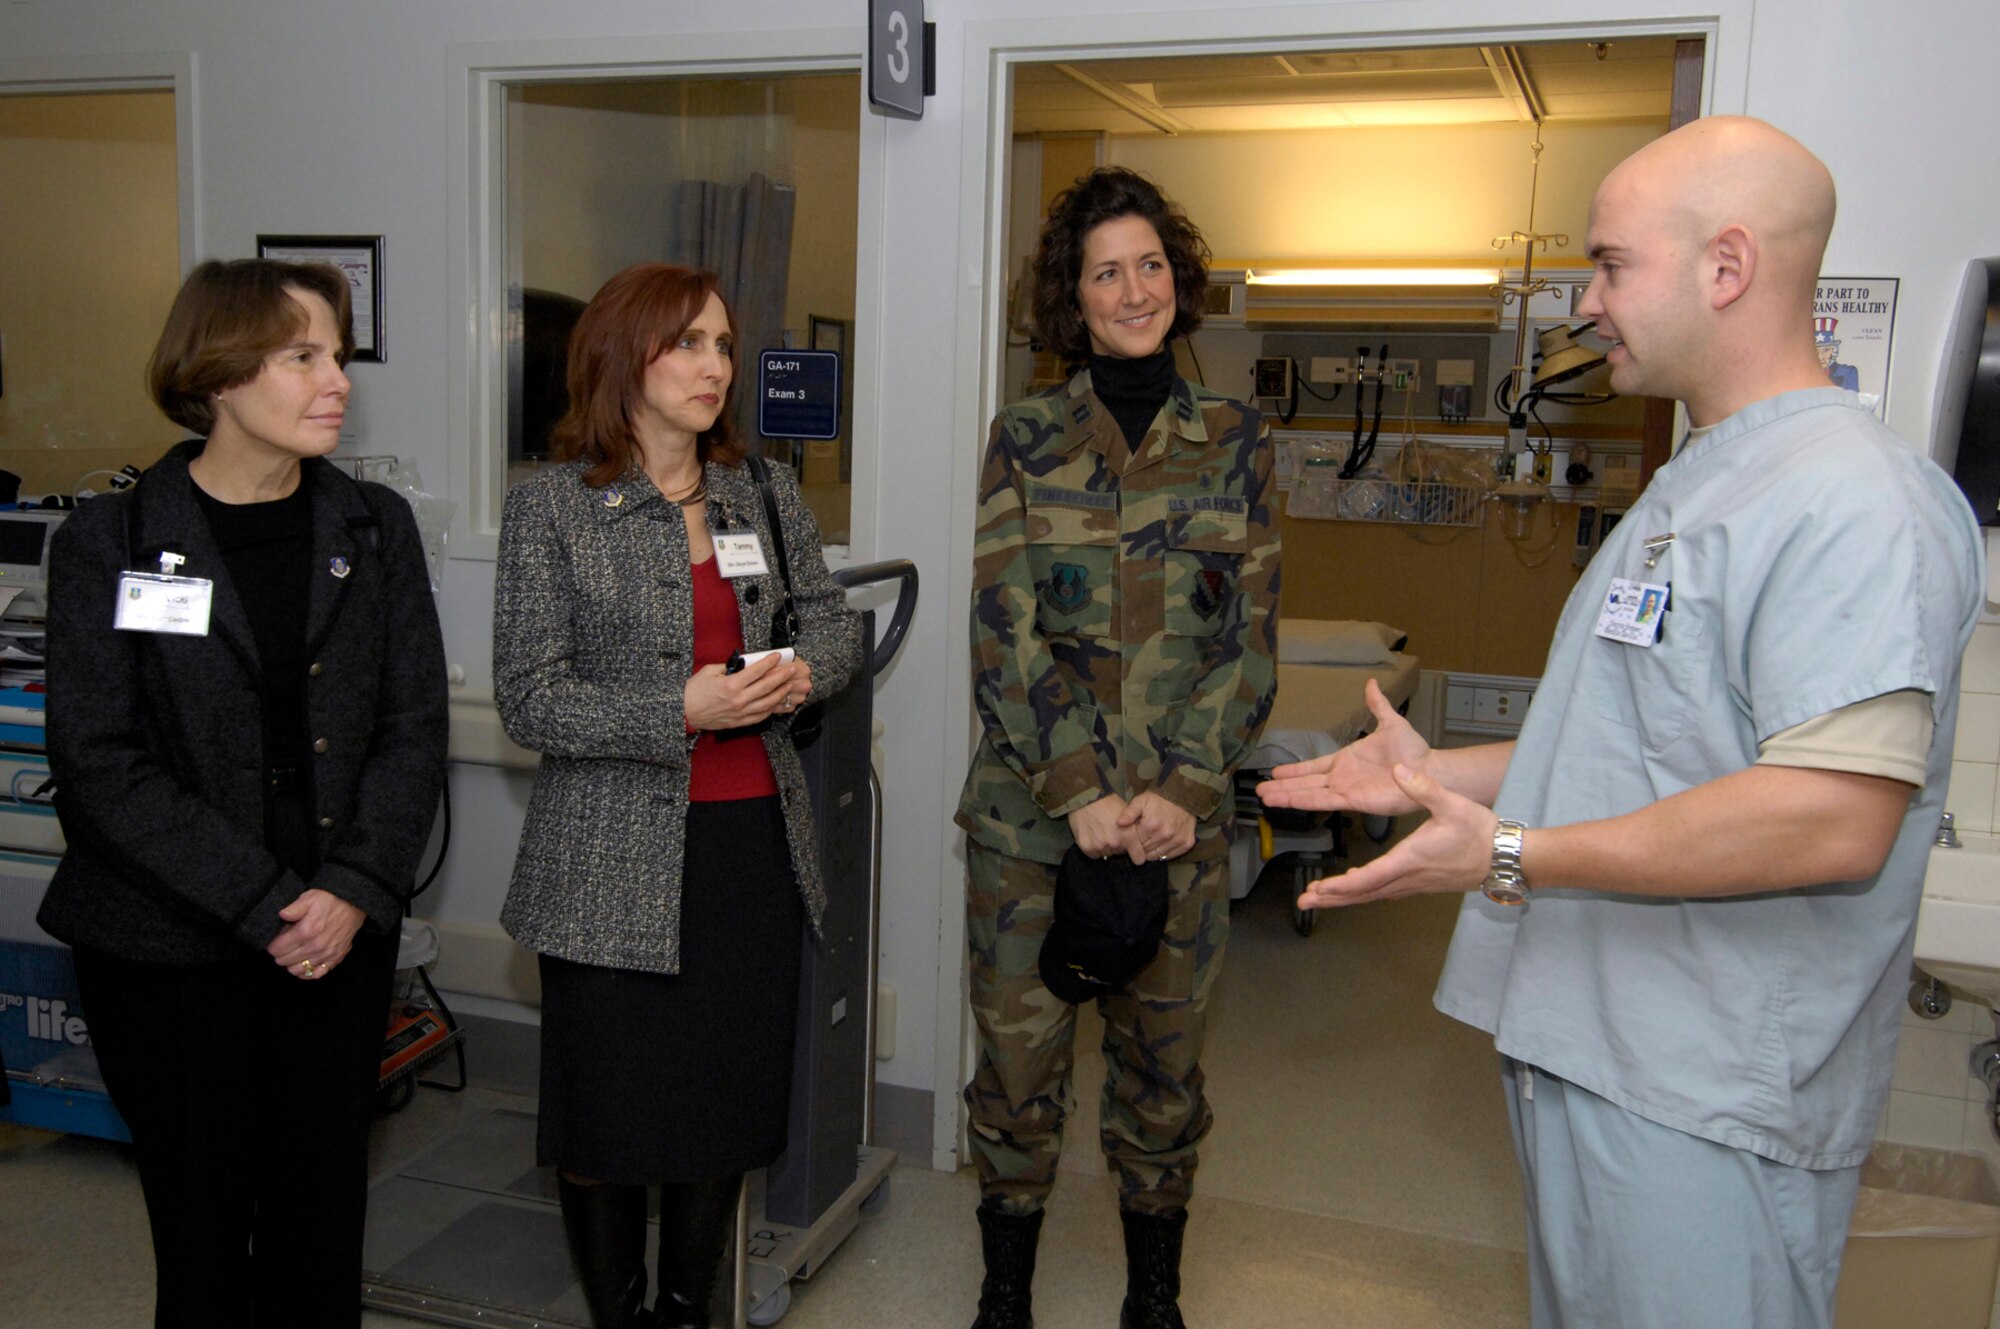 Vicky Carlson, far left, Tammy Dennis and Capt. Courtney Finkbeiner, 66th Medical Operations Squadron Health Care integrator and deputy chief nurse, listen as Tech. Sgt. Derrick Brewer, 66 MDG Education and Training noncommissioned officer in charge, describes some of the skills the 66th Medical Group nurses and medical technicians cultivate while working at the Veterans Affairs Boston Health Care System in West Roxbury, Mass.  Mrs. Carlson and members of the Hanscom Spouses Club toured the hospital Jan. 28 as part of Mrs. Carlson’s official visit to Hanscom with her husband, Gen. Bruce Carlson, Air Force Materiel Command commander.

